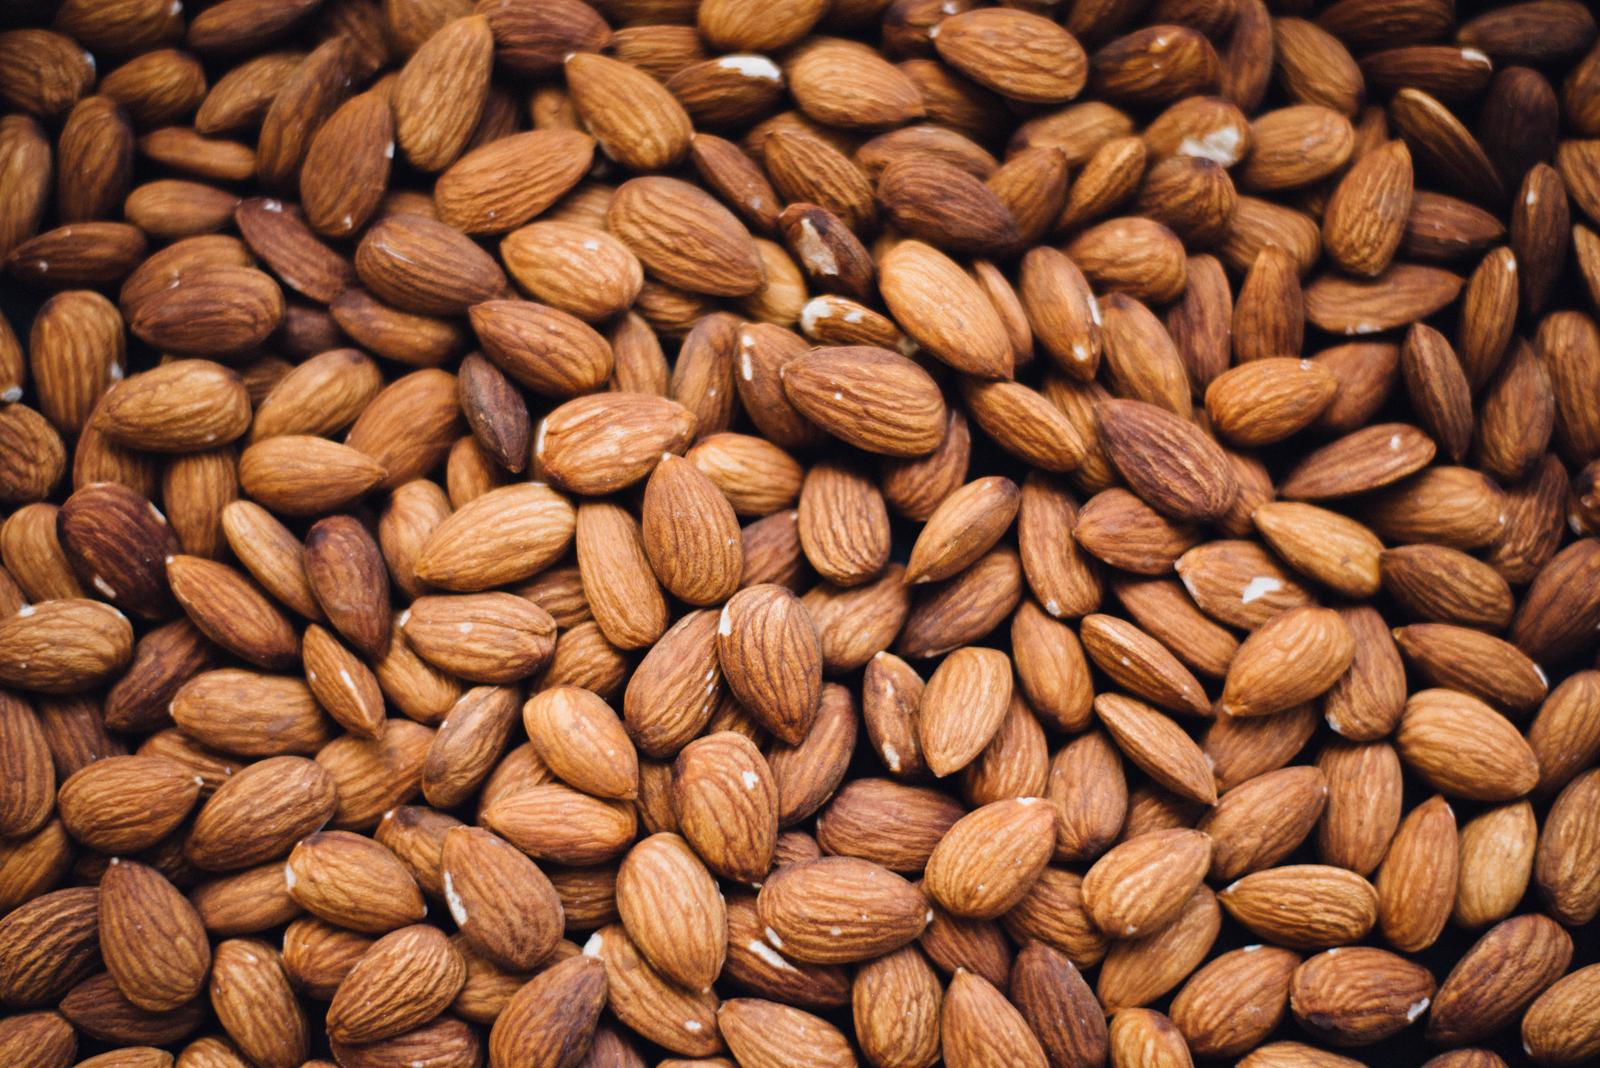 What Dessert Flavor Are You? Almonds